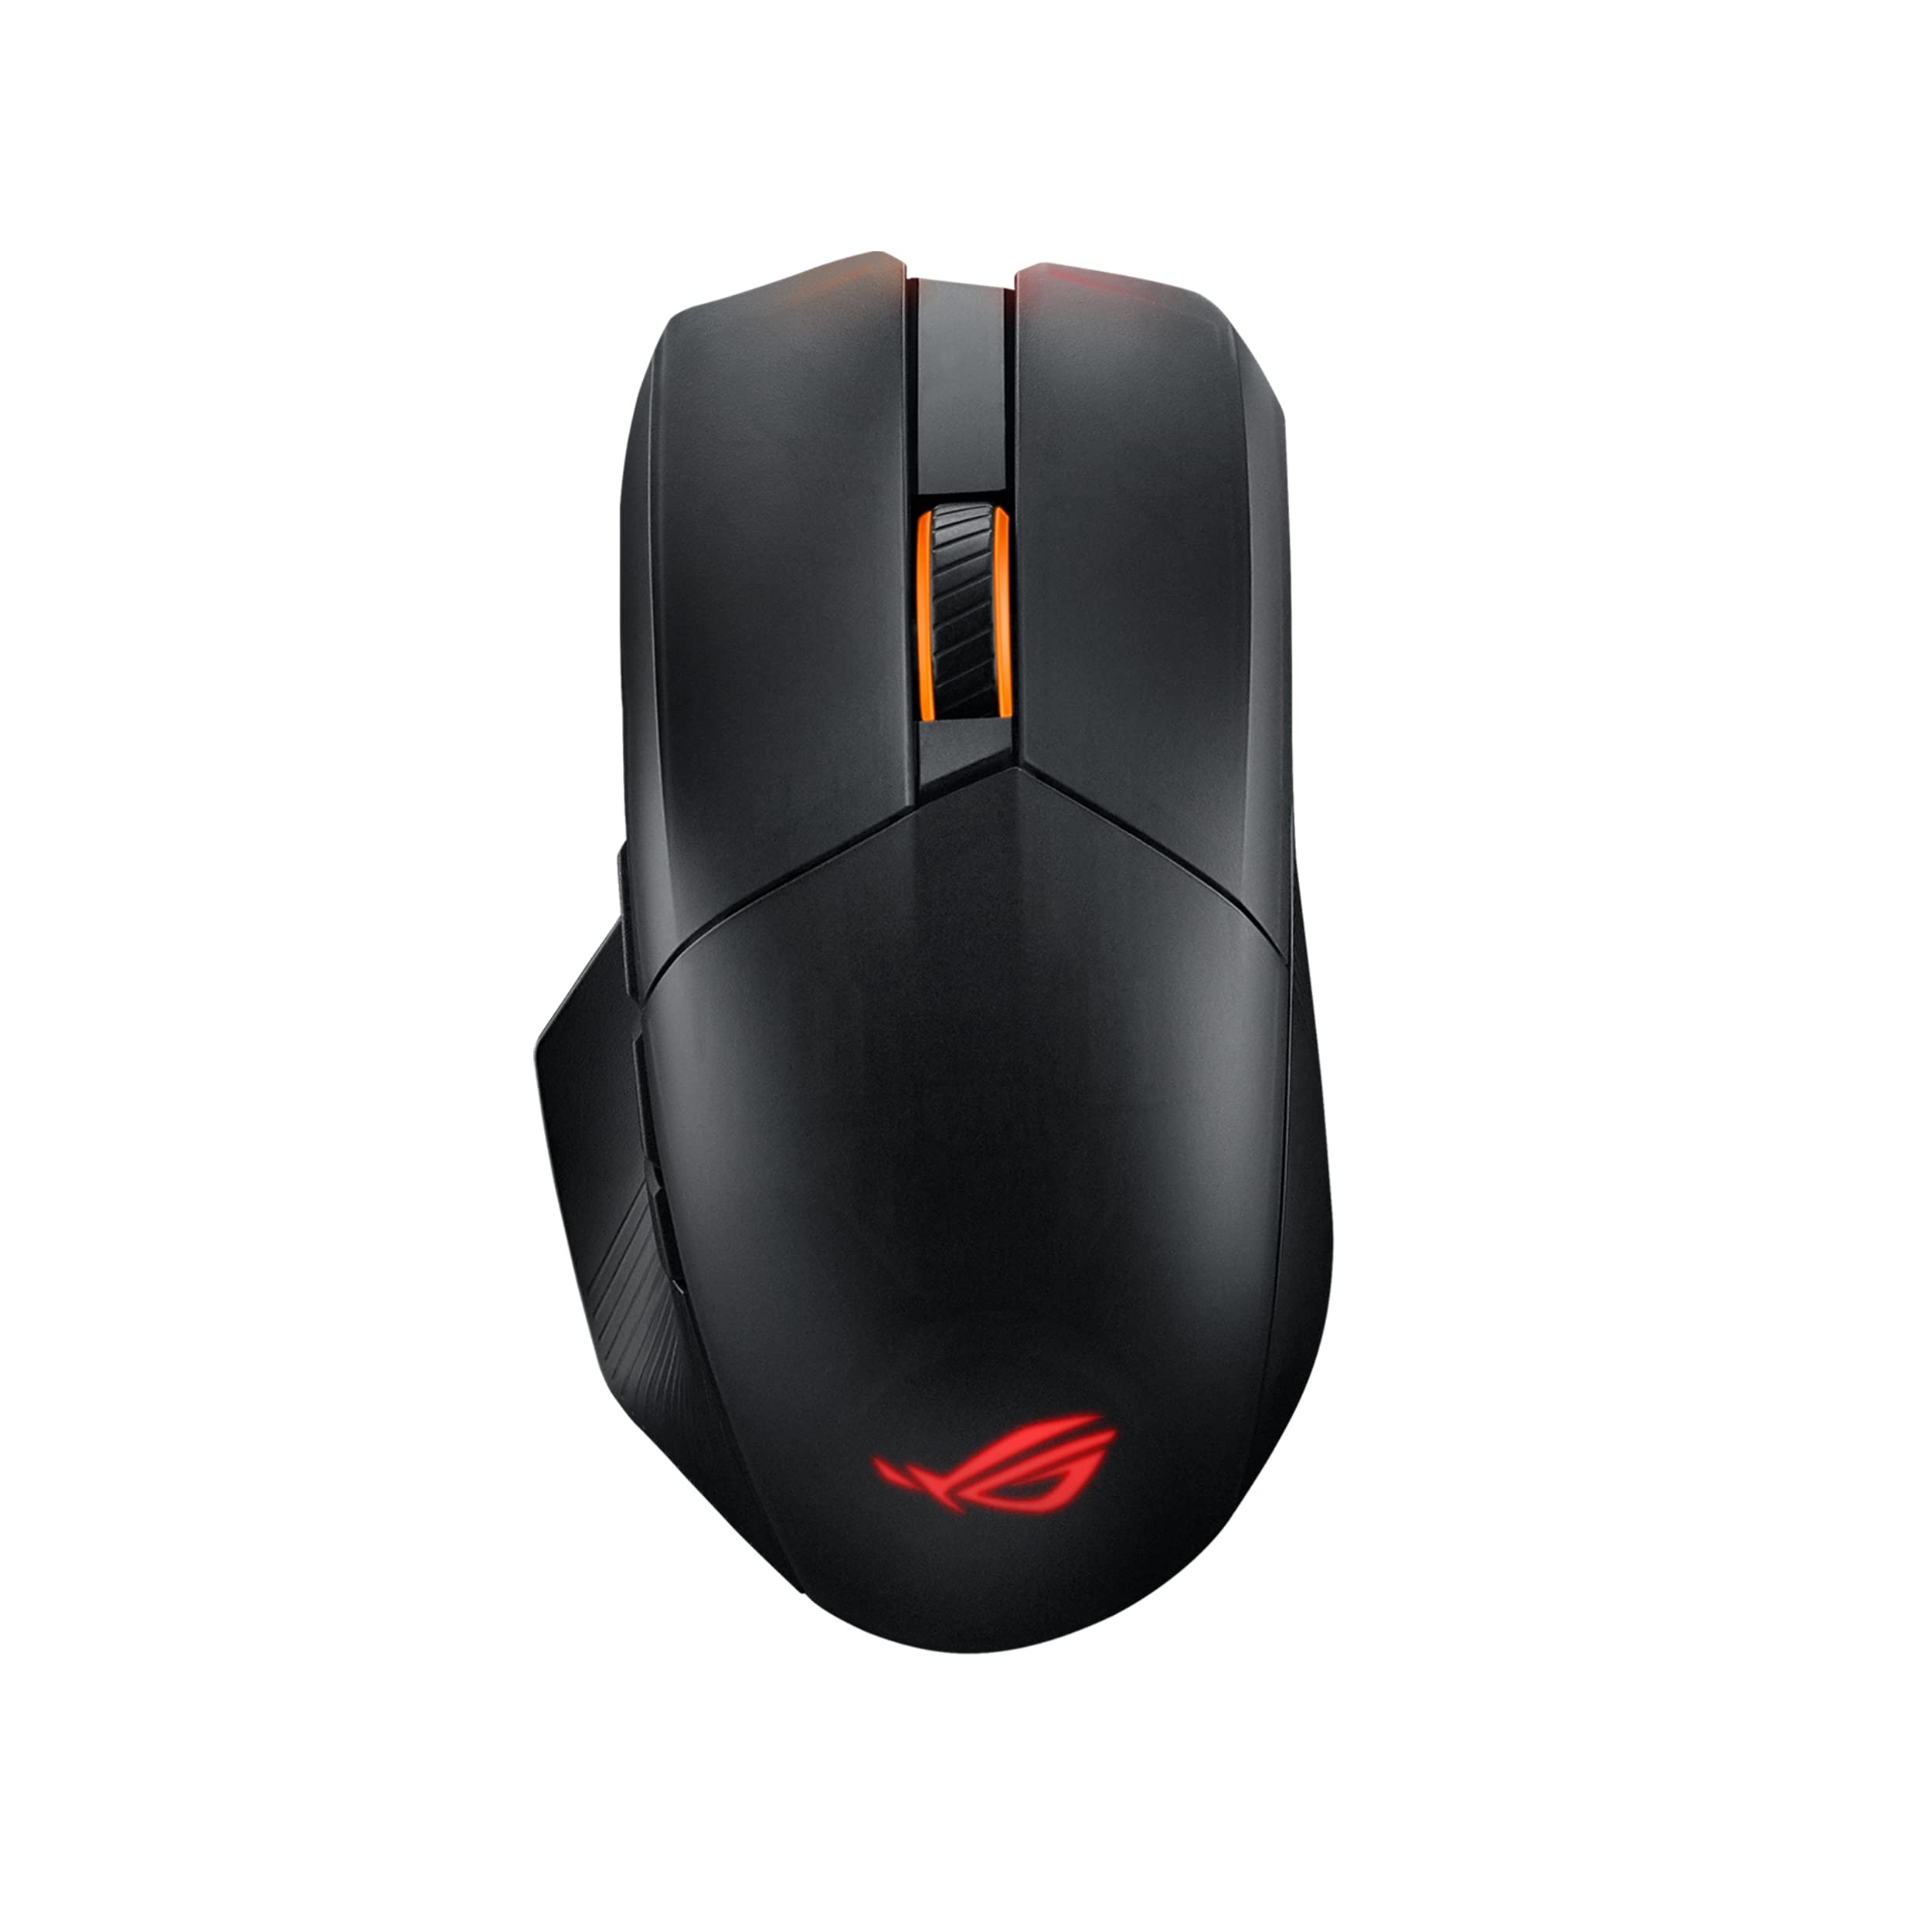 ASUS ROG Chakram X Origin Wireless Gaming Mouse w/ Tri-mode Connectivity (Black) $90 + Free Shipping